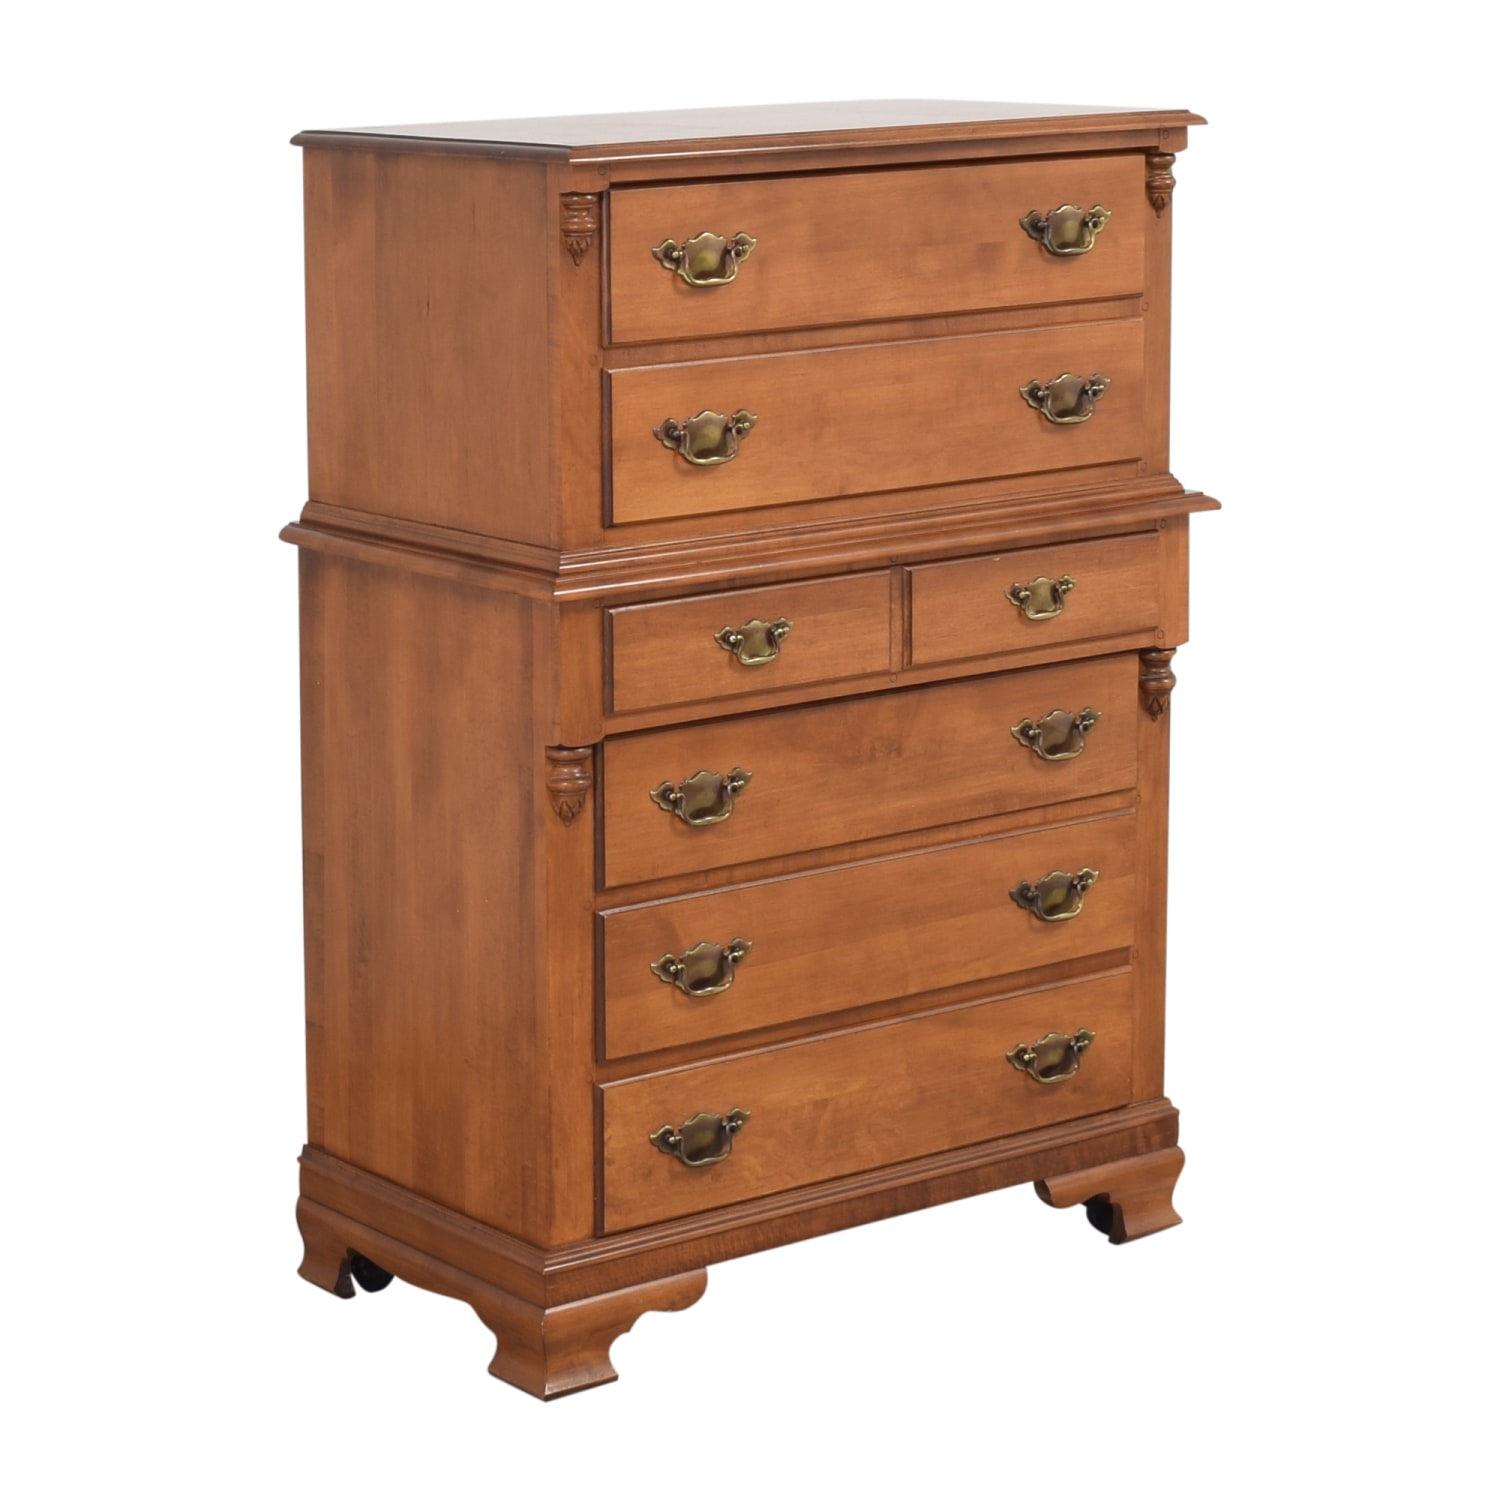 Tell City Chair Co. Young Republic maple 5 drawer chest; 37-1216 - R.H.  Lee & Co. Auctioneers